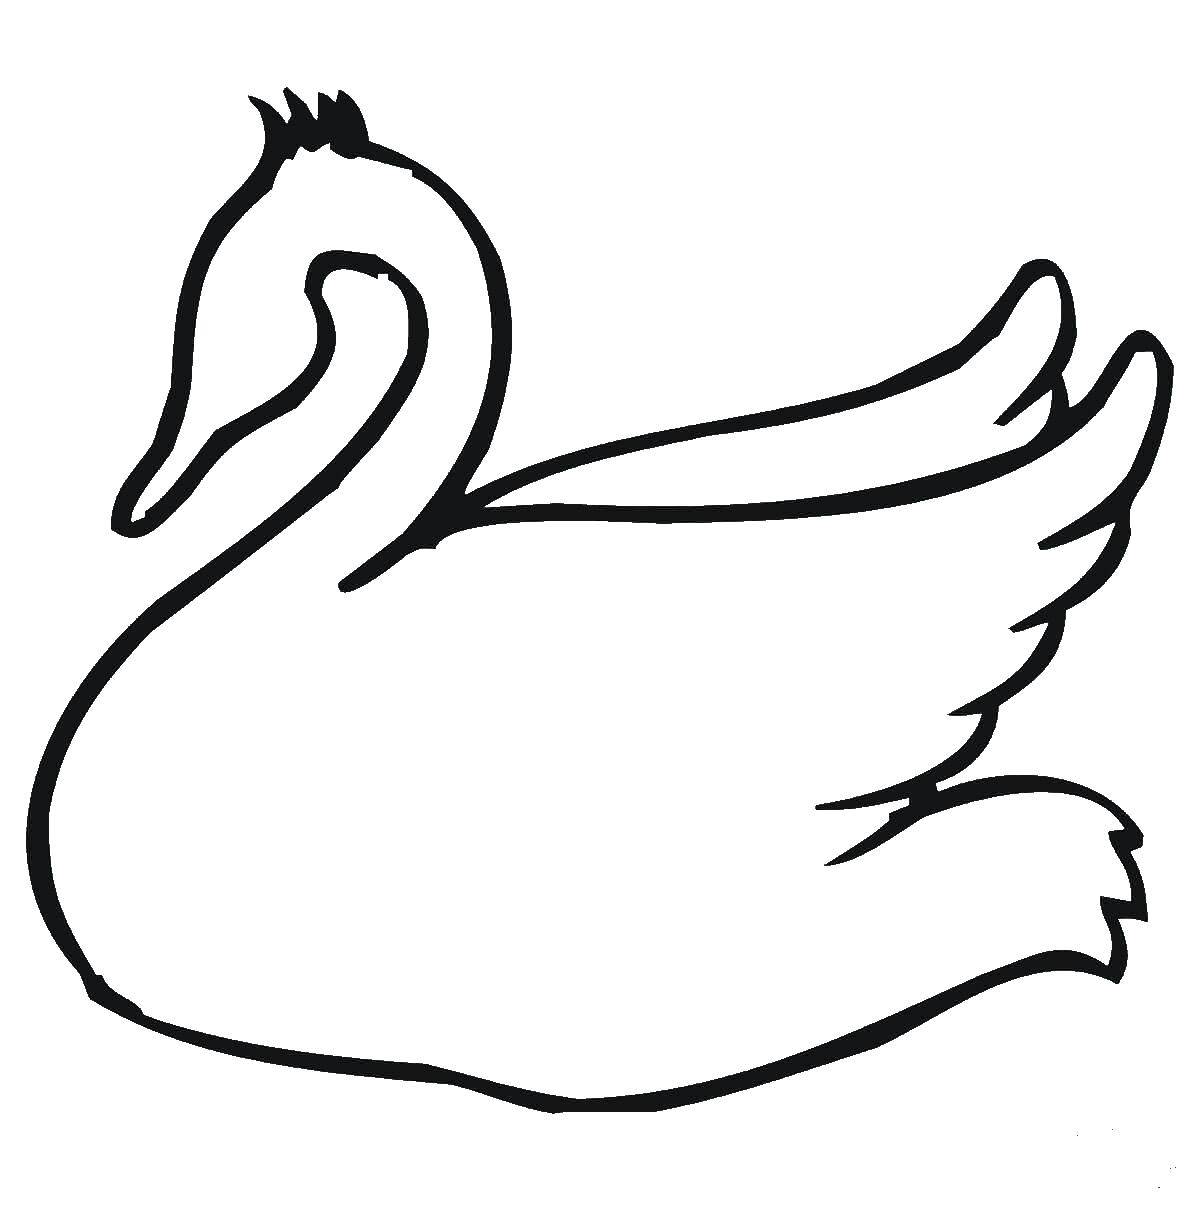 Coloring The outline of a Swan. Category coloring. Tags:  Outline .